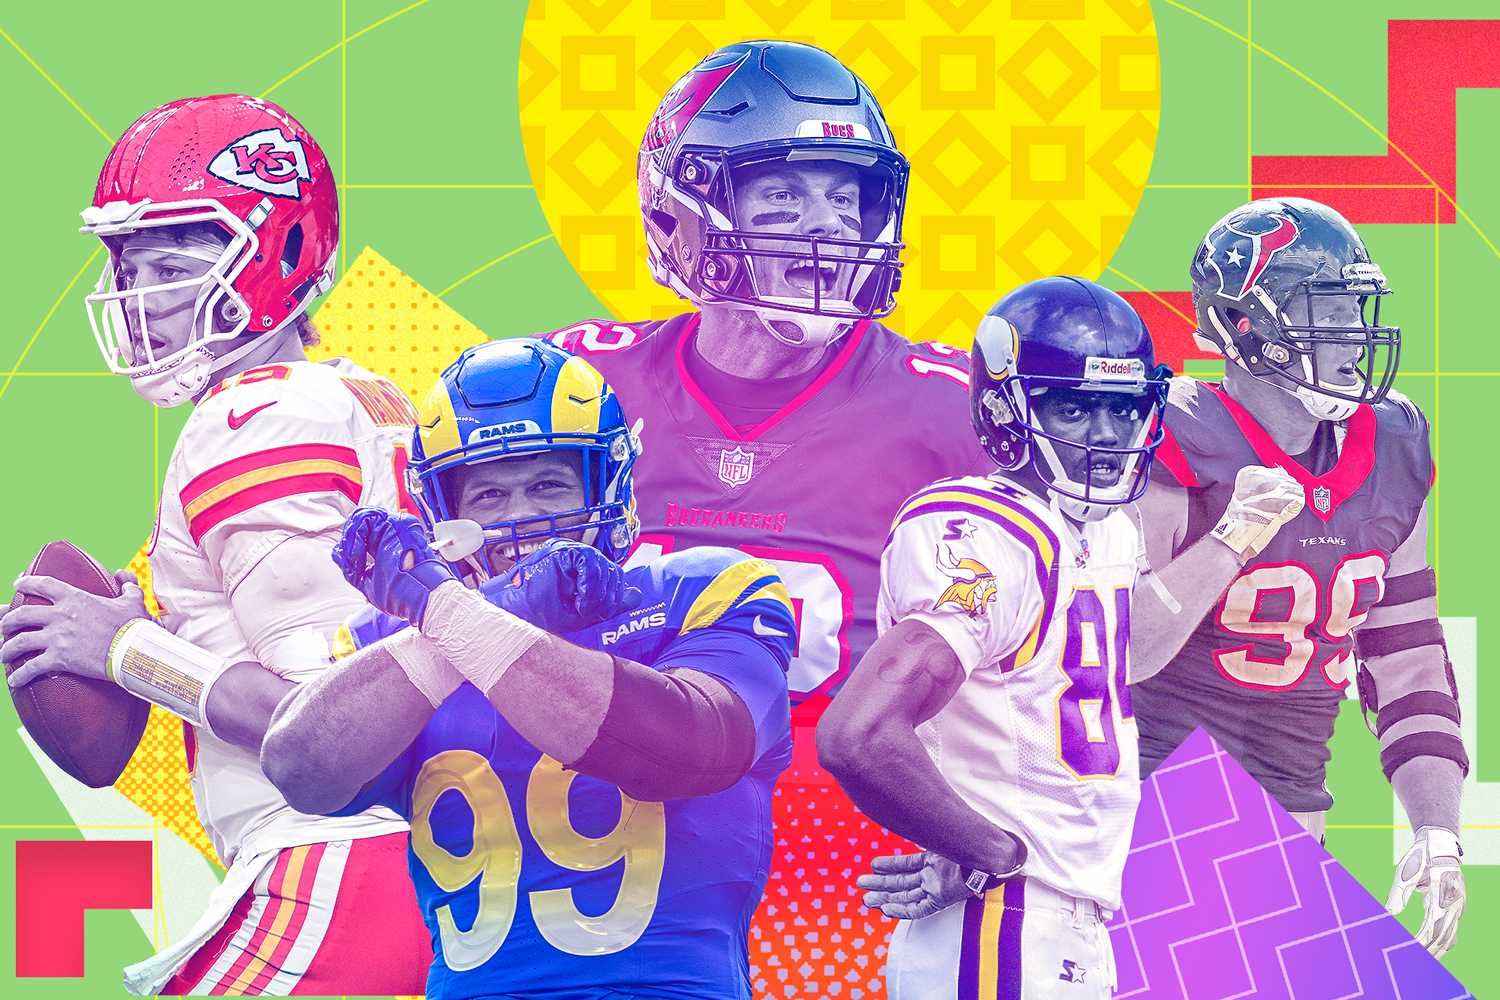 Ranking the top 25 NFL players since 2000